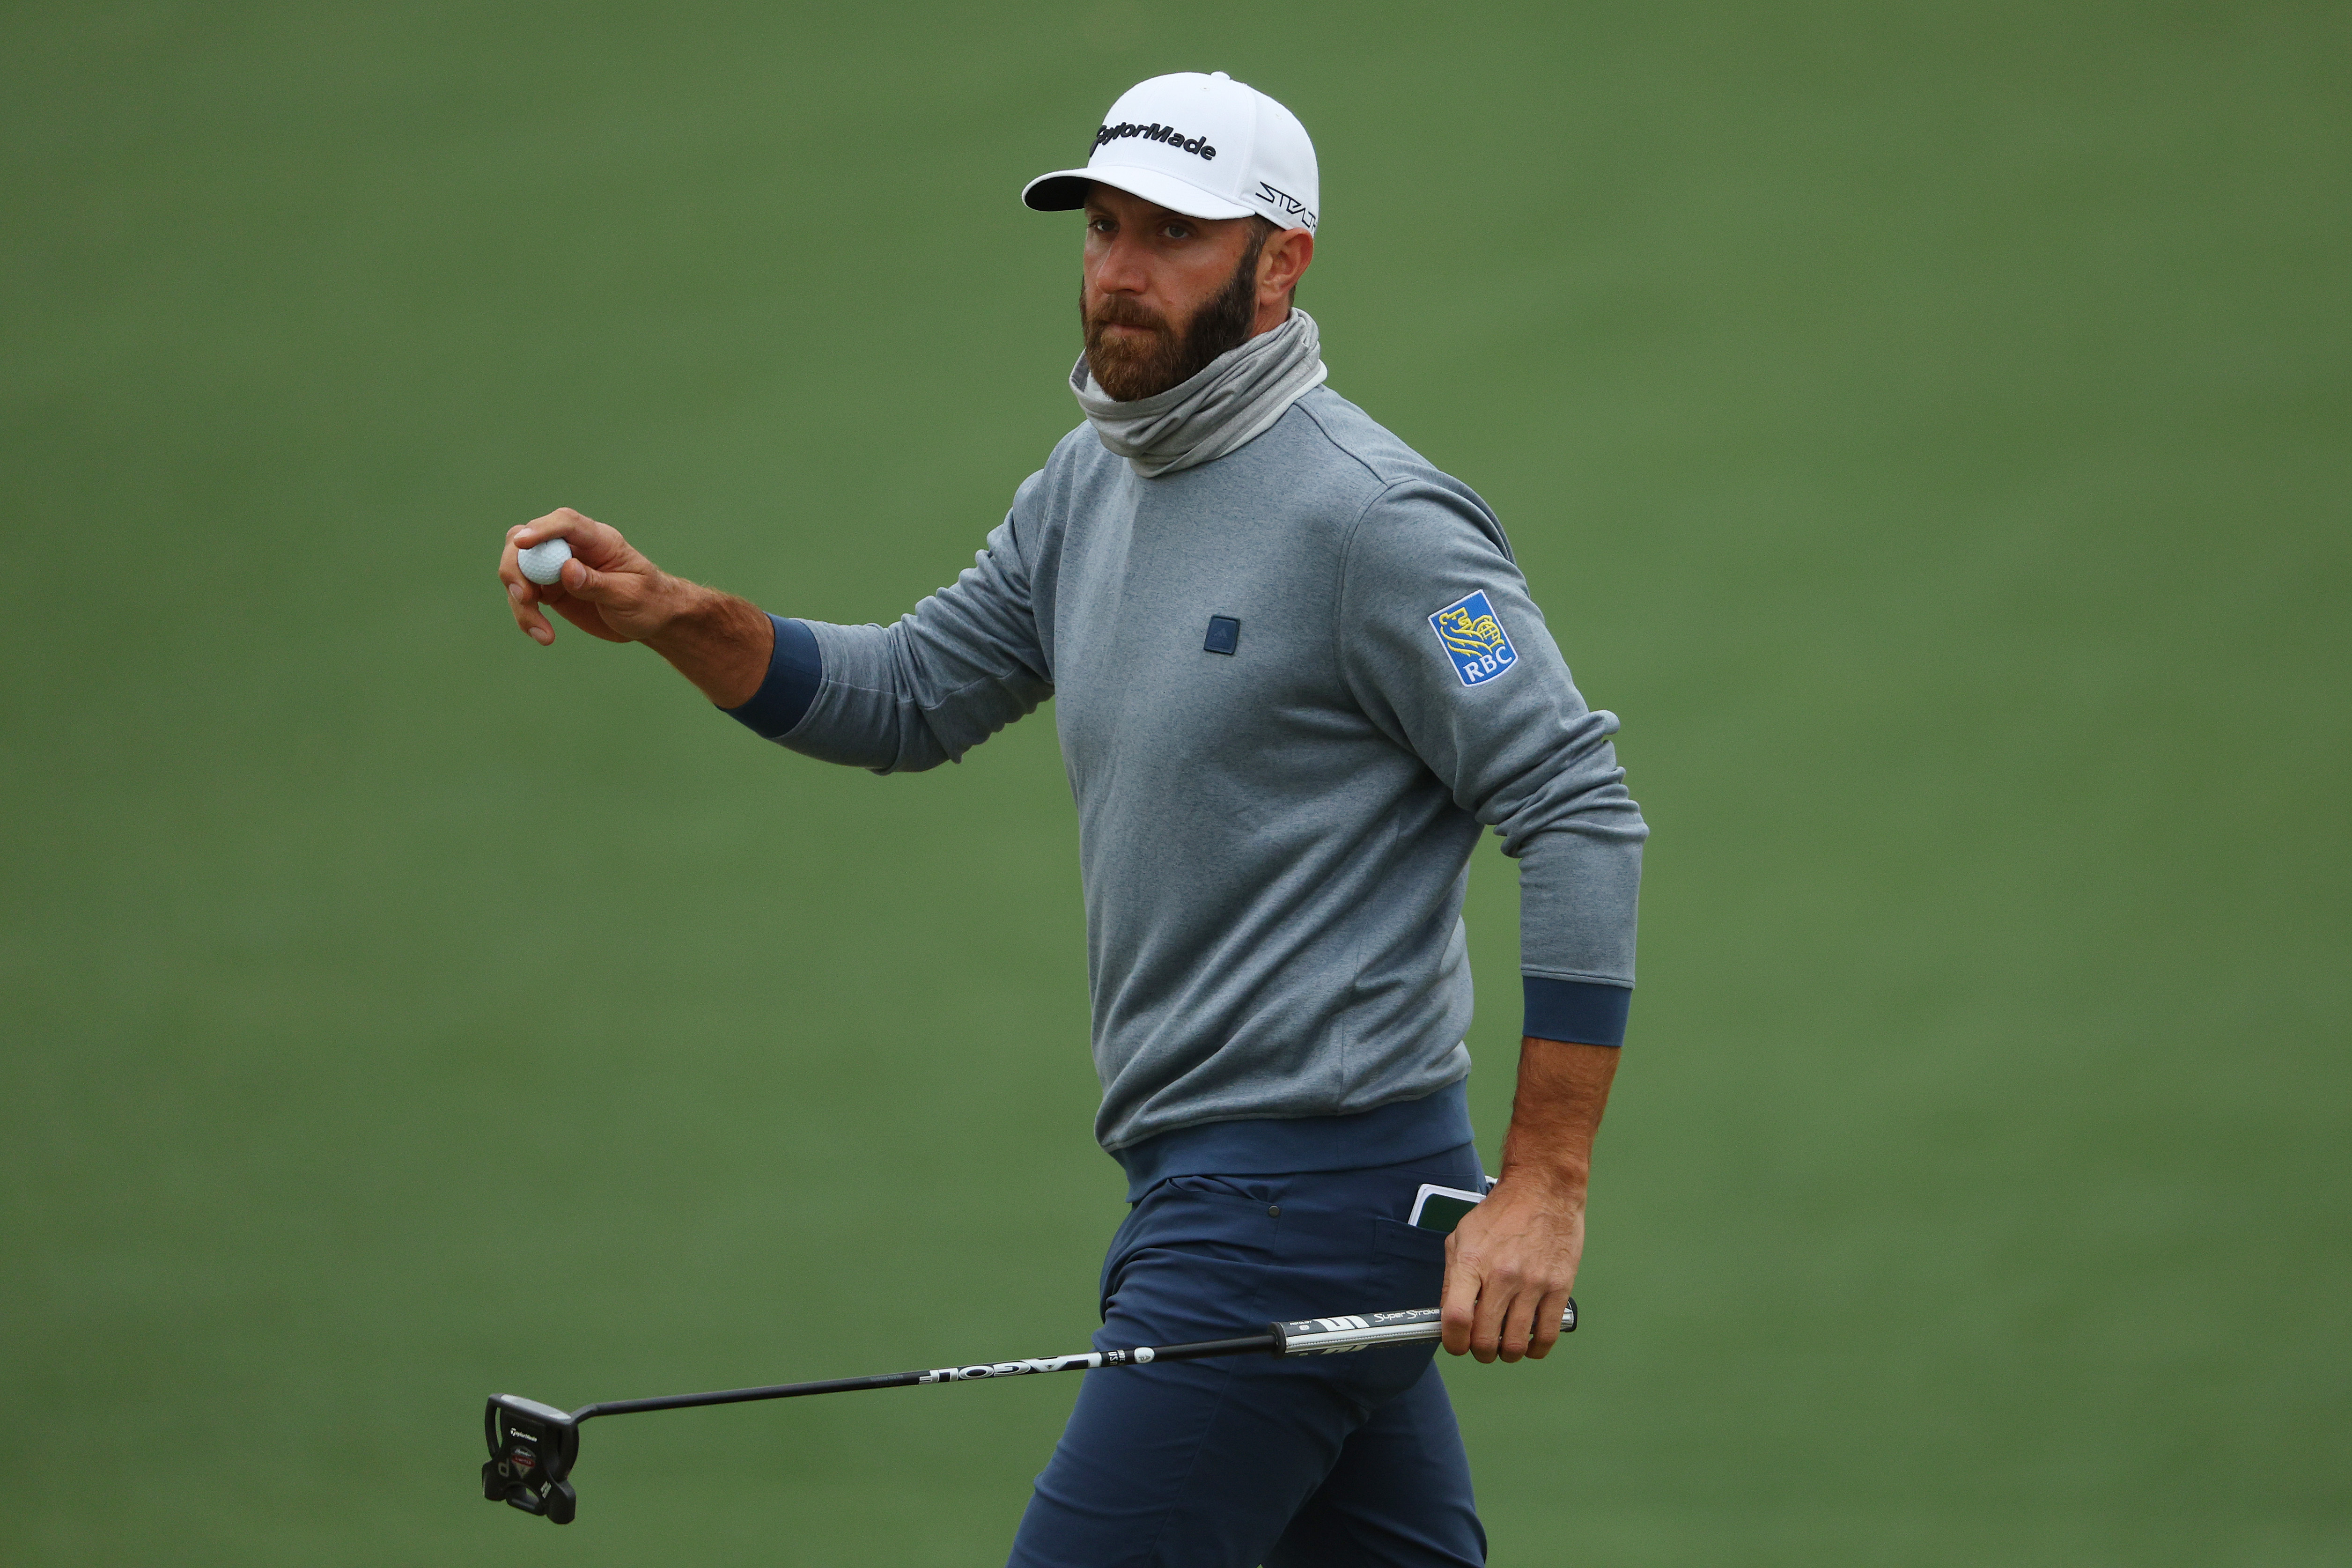 RBC cuts Dustin Johnson after LIV Golf announcement We are extremely disappointed in his decision/